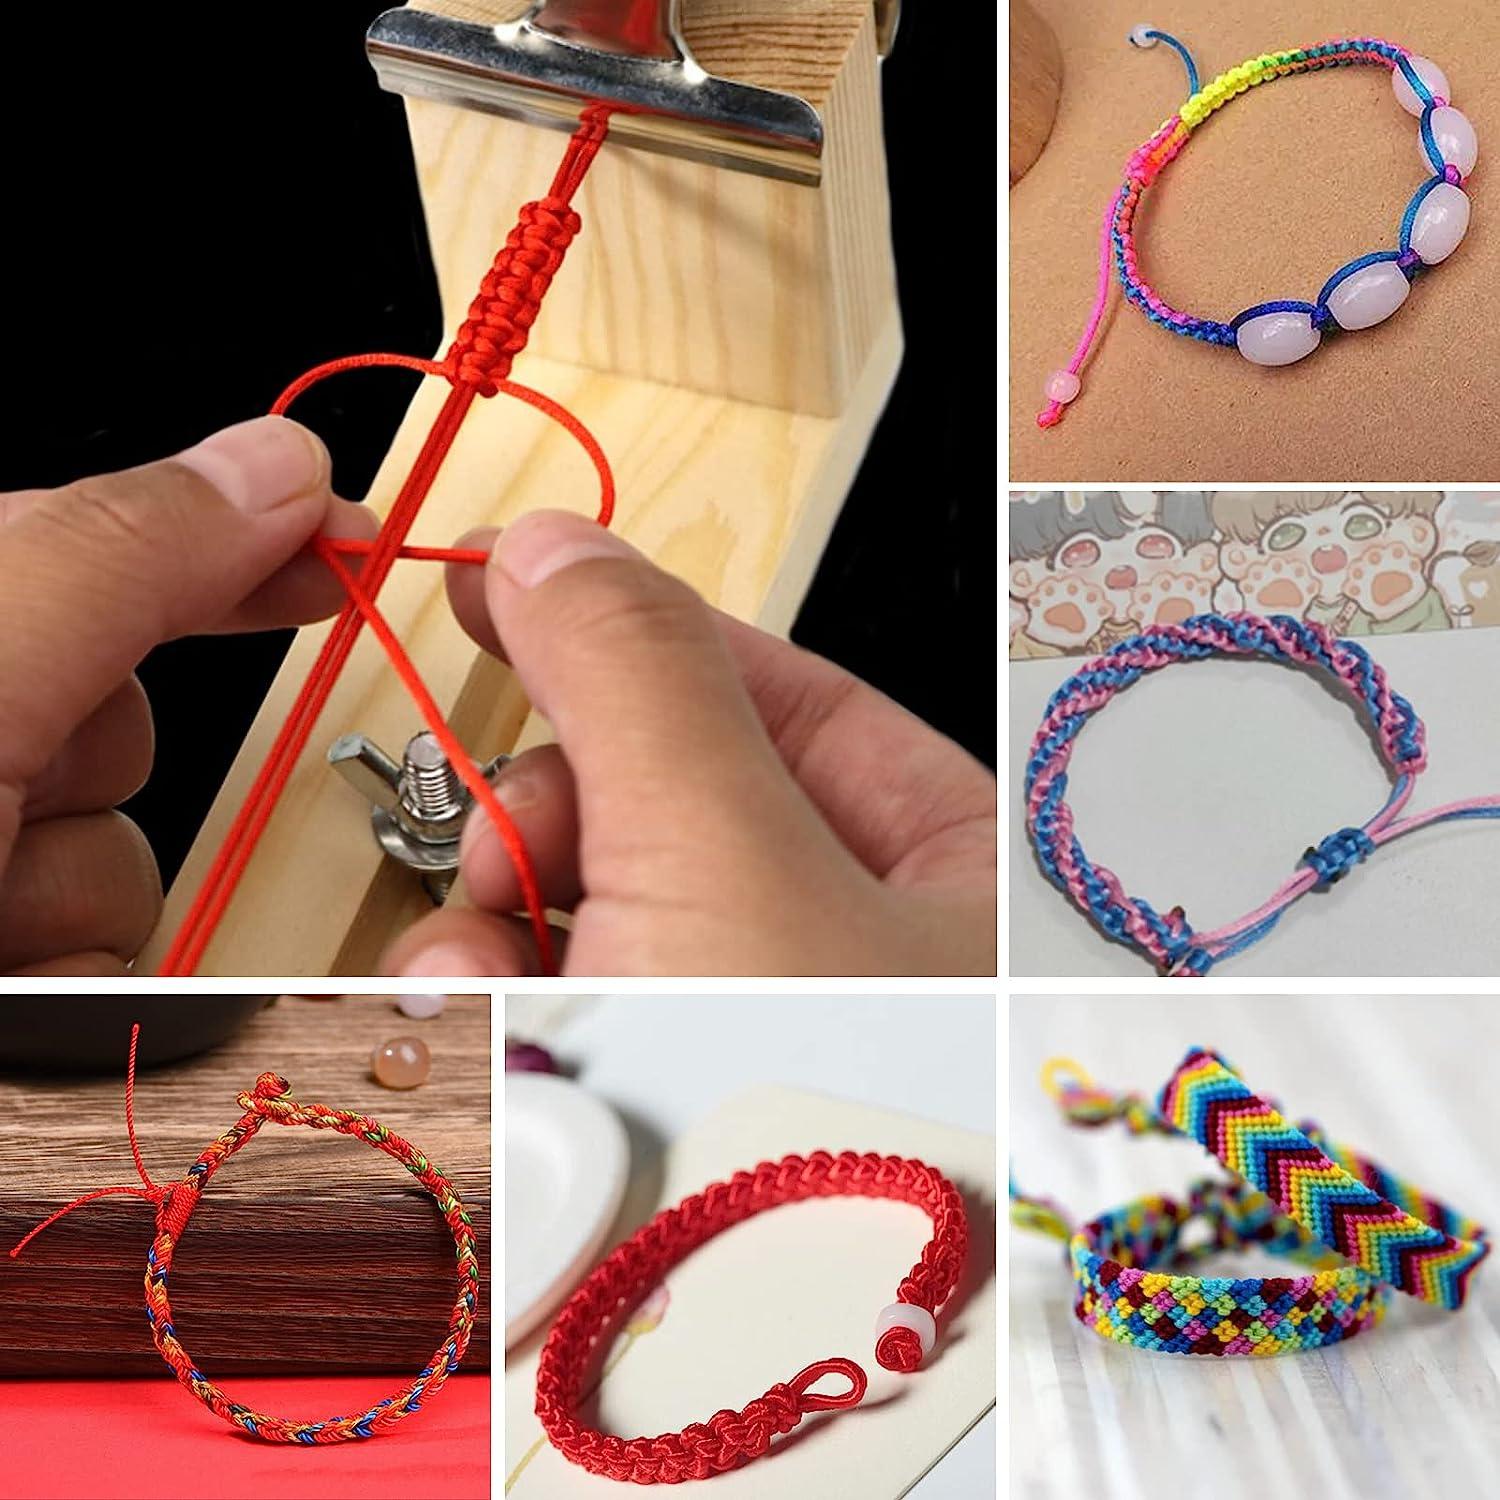 Wood Paracord Jig Bracelet Maker With Rope Rappelling Equipment DIY  Wristband Knitting Tool 230628 From Nan09, $10.5